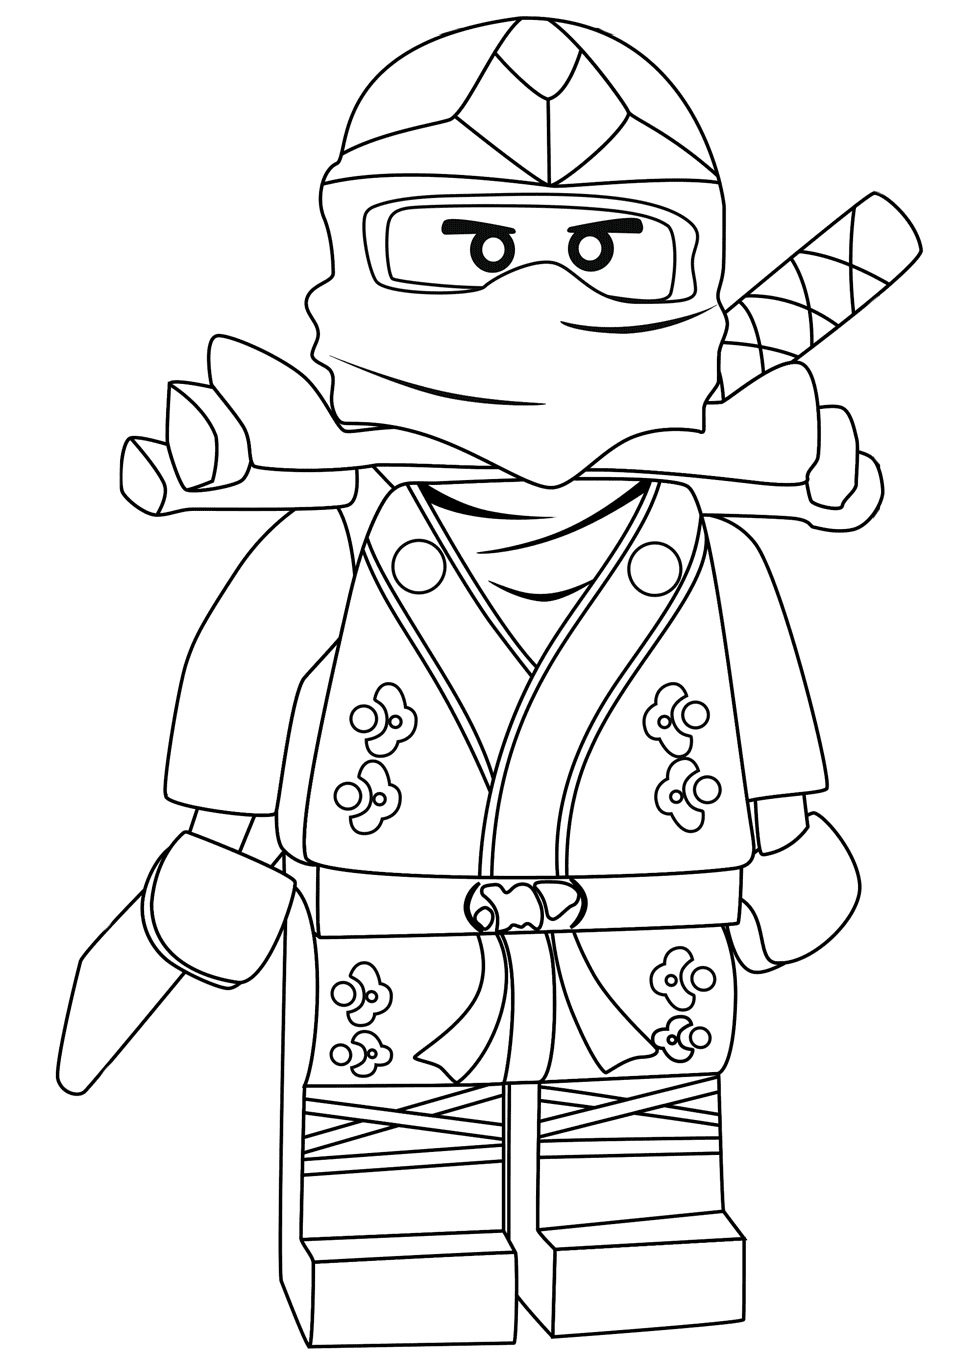 Ninjago coloring pages printable for free download